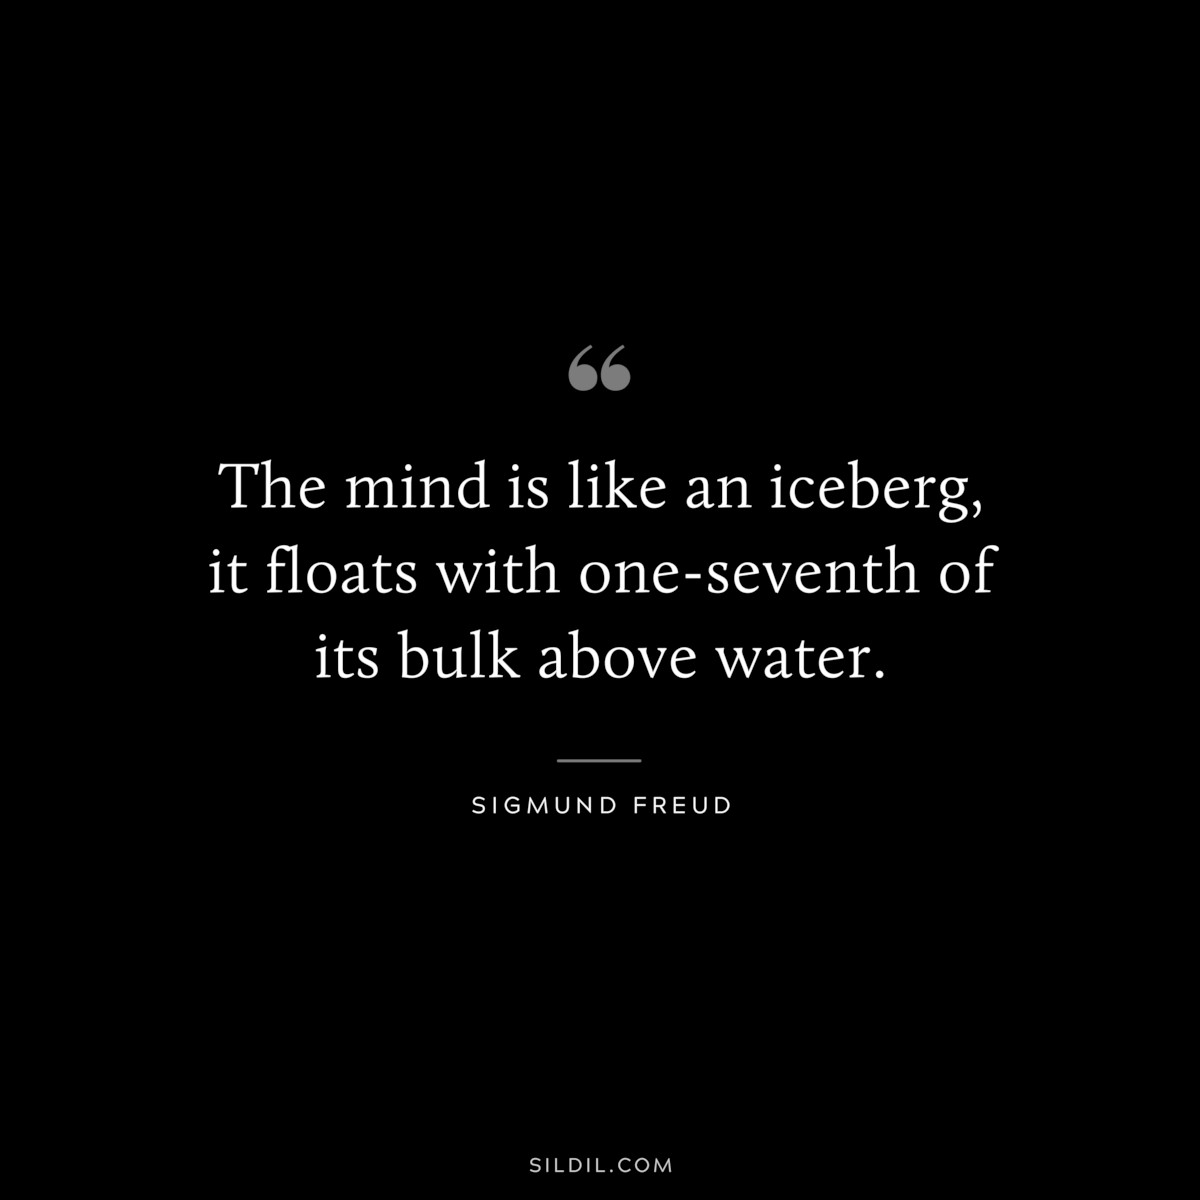 The mind is like an iceberg, it floats with one-seventh of its bulk above water. ― Sigmund Frued